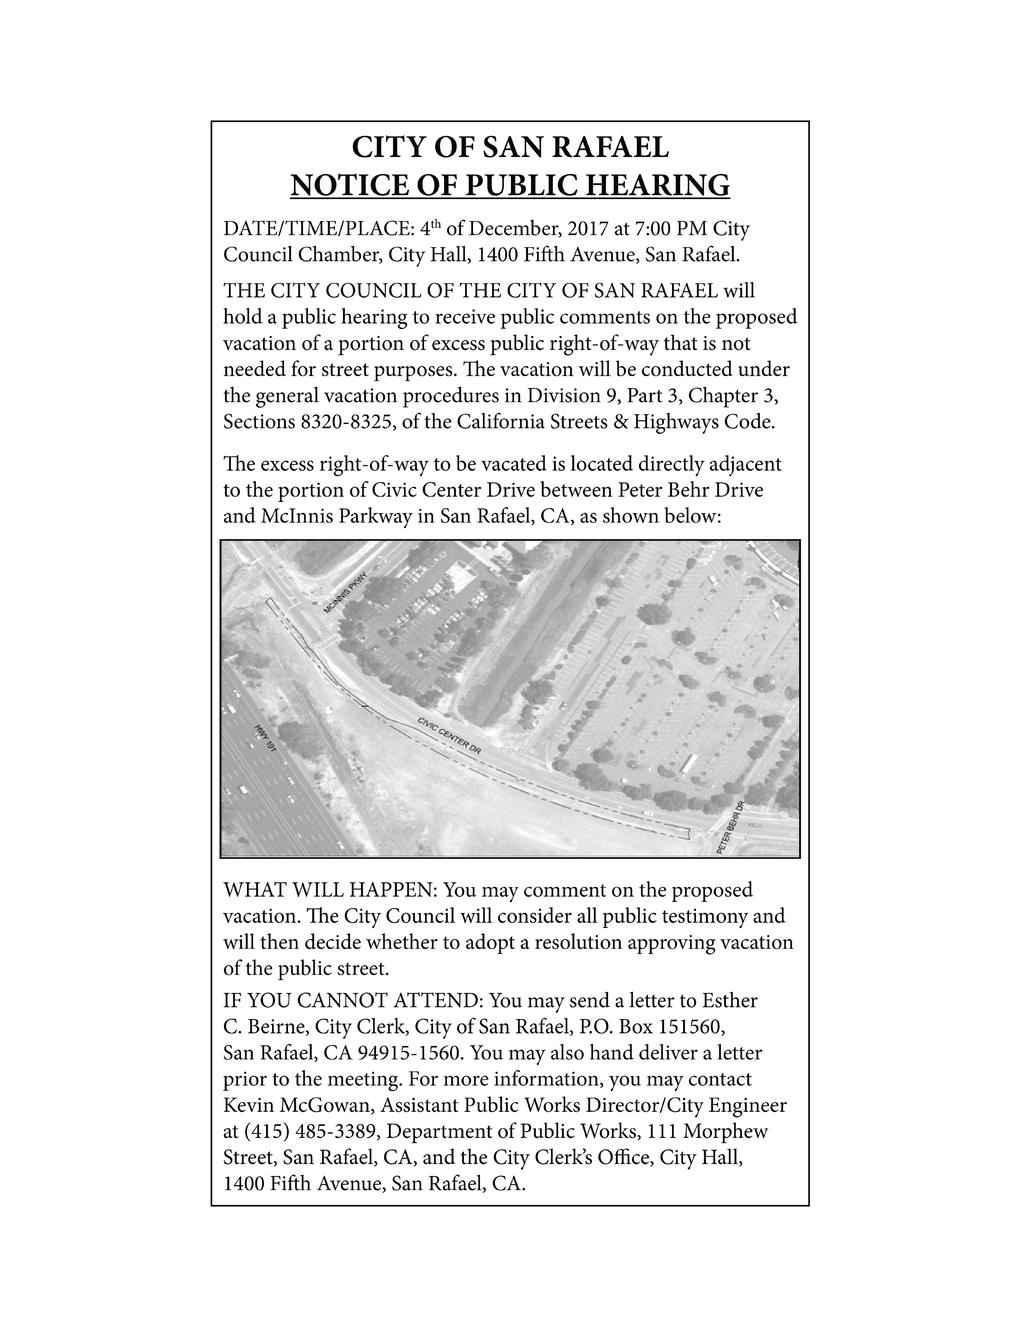 CITY OF SAN RAFAEL NOTICE OF PUBLIC HEARING DATE/TIME/PLACE: 4th of December, 2017 at 7:00 PM City Council Chamber, City Hall, 1400 Fifth Avenue, San Rafael.